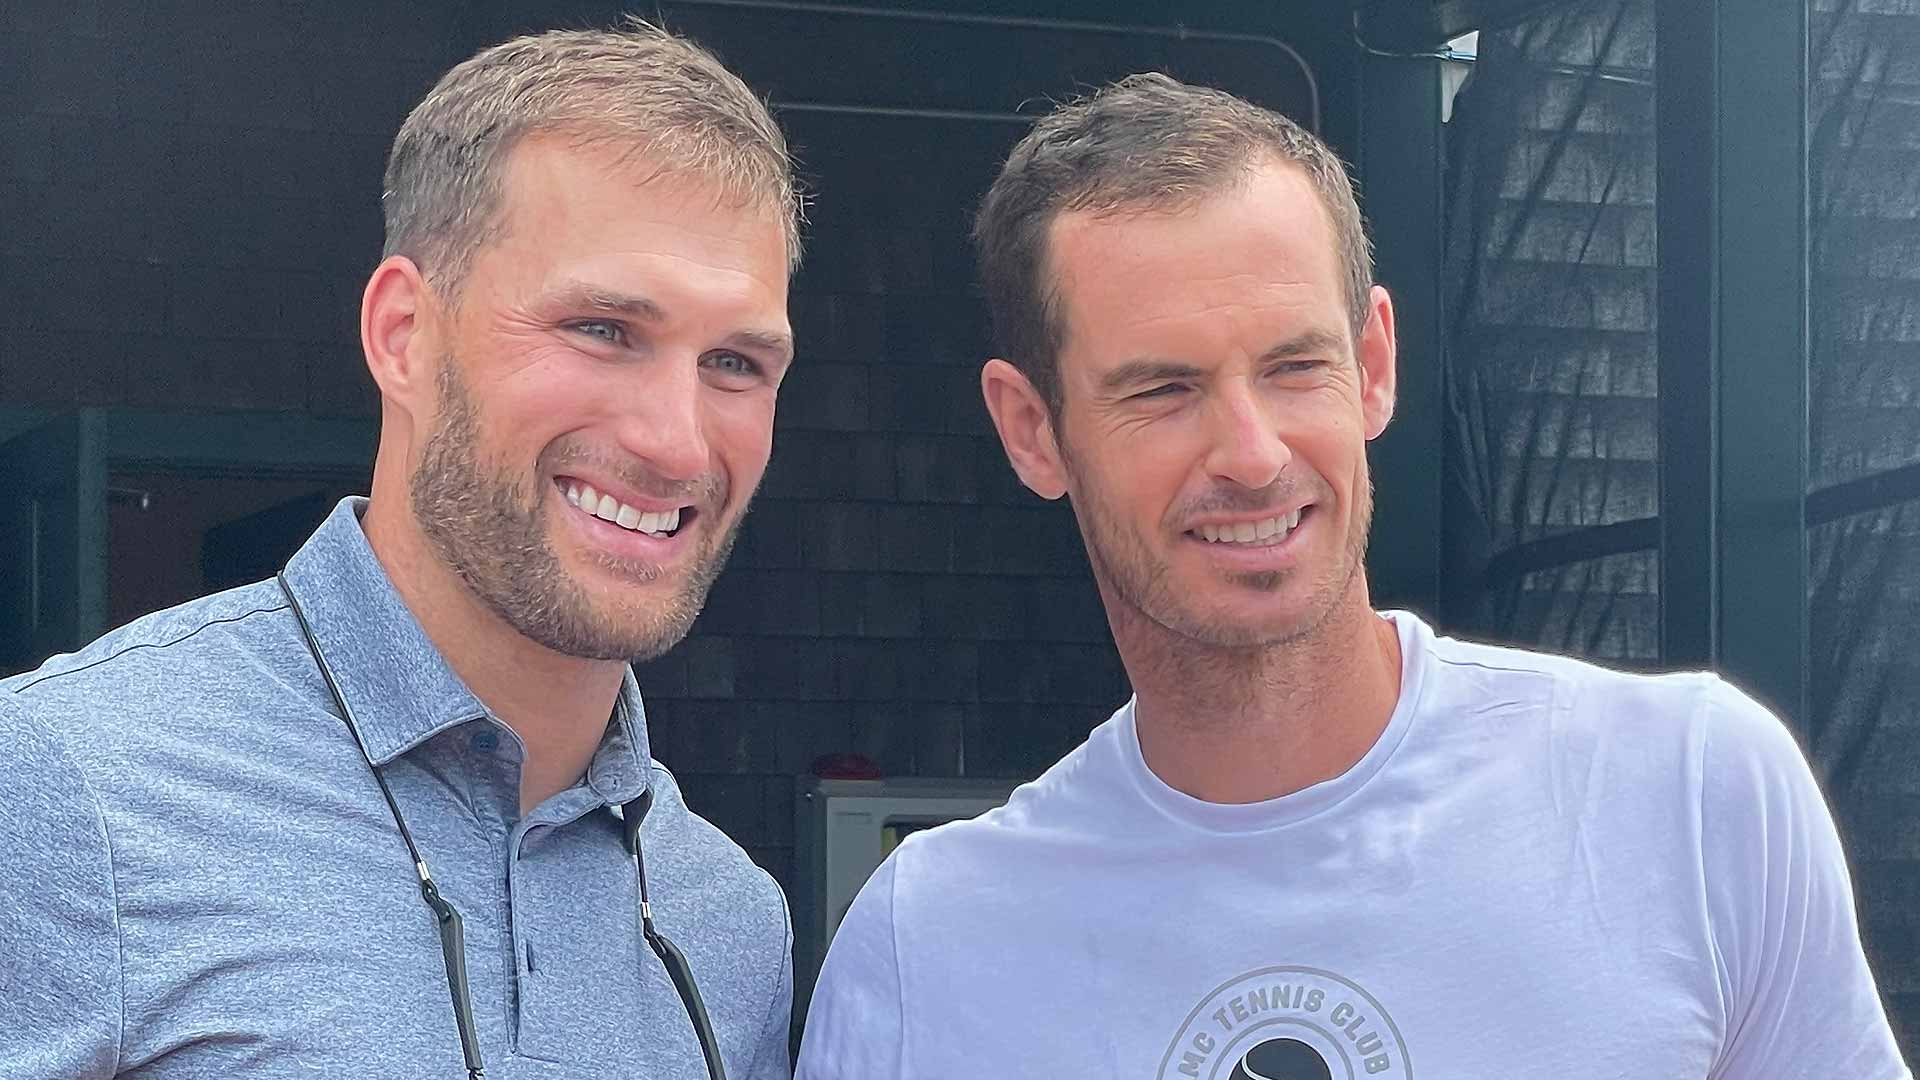 NFL Star Kirk Cousins On Andy Murray: 'I Admire His Grit' - ATP Tour